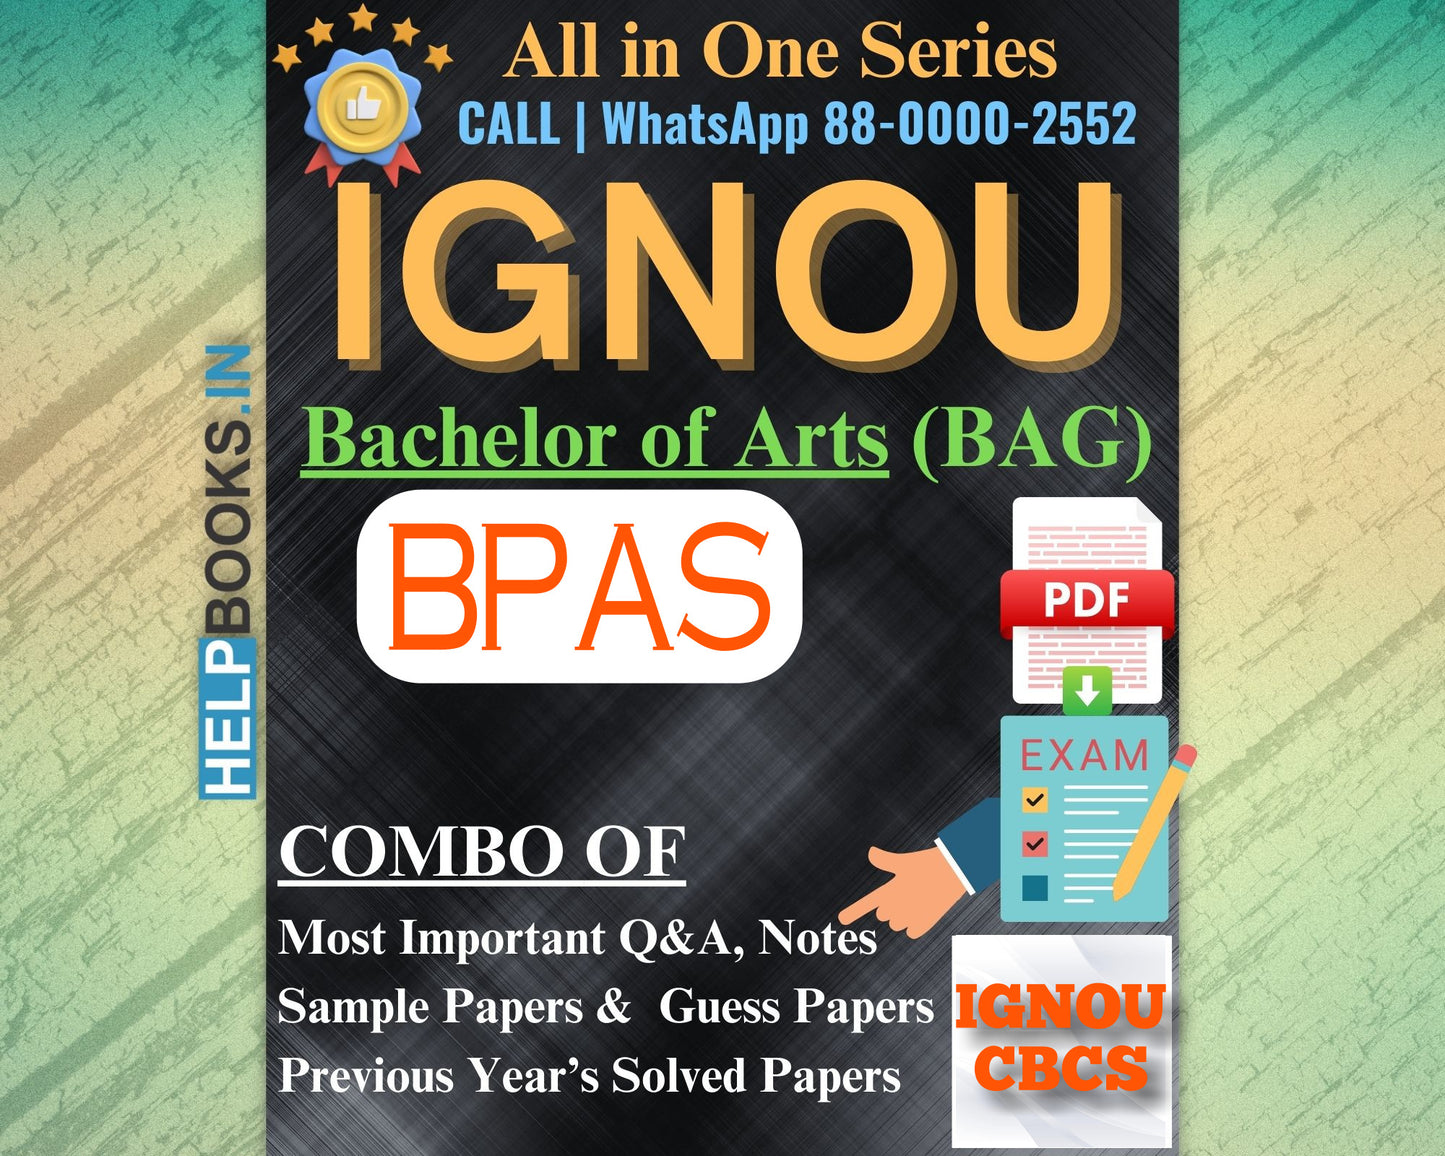 IGNOU BAG Online Study Package: Bachelor of Arts (BA) - Previous Years Solved Papers, Q&A, Exam Notes, Sample Papers, Guess Papers-BPAS184, BPAS186